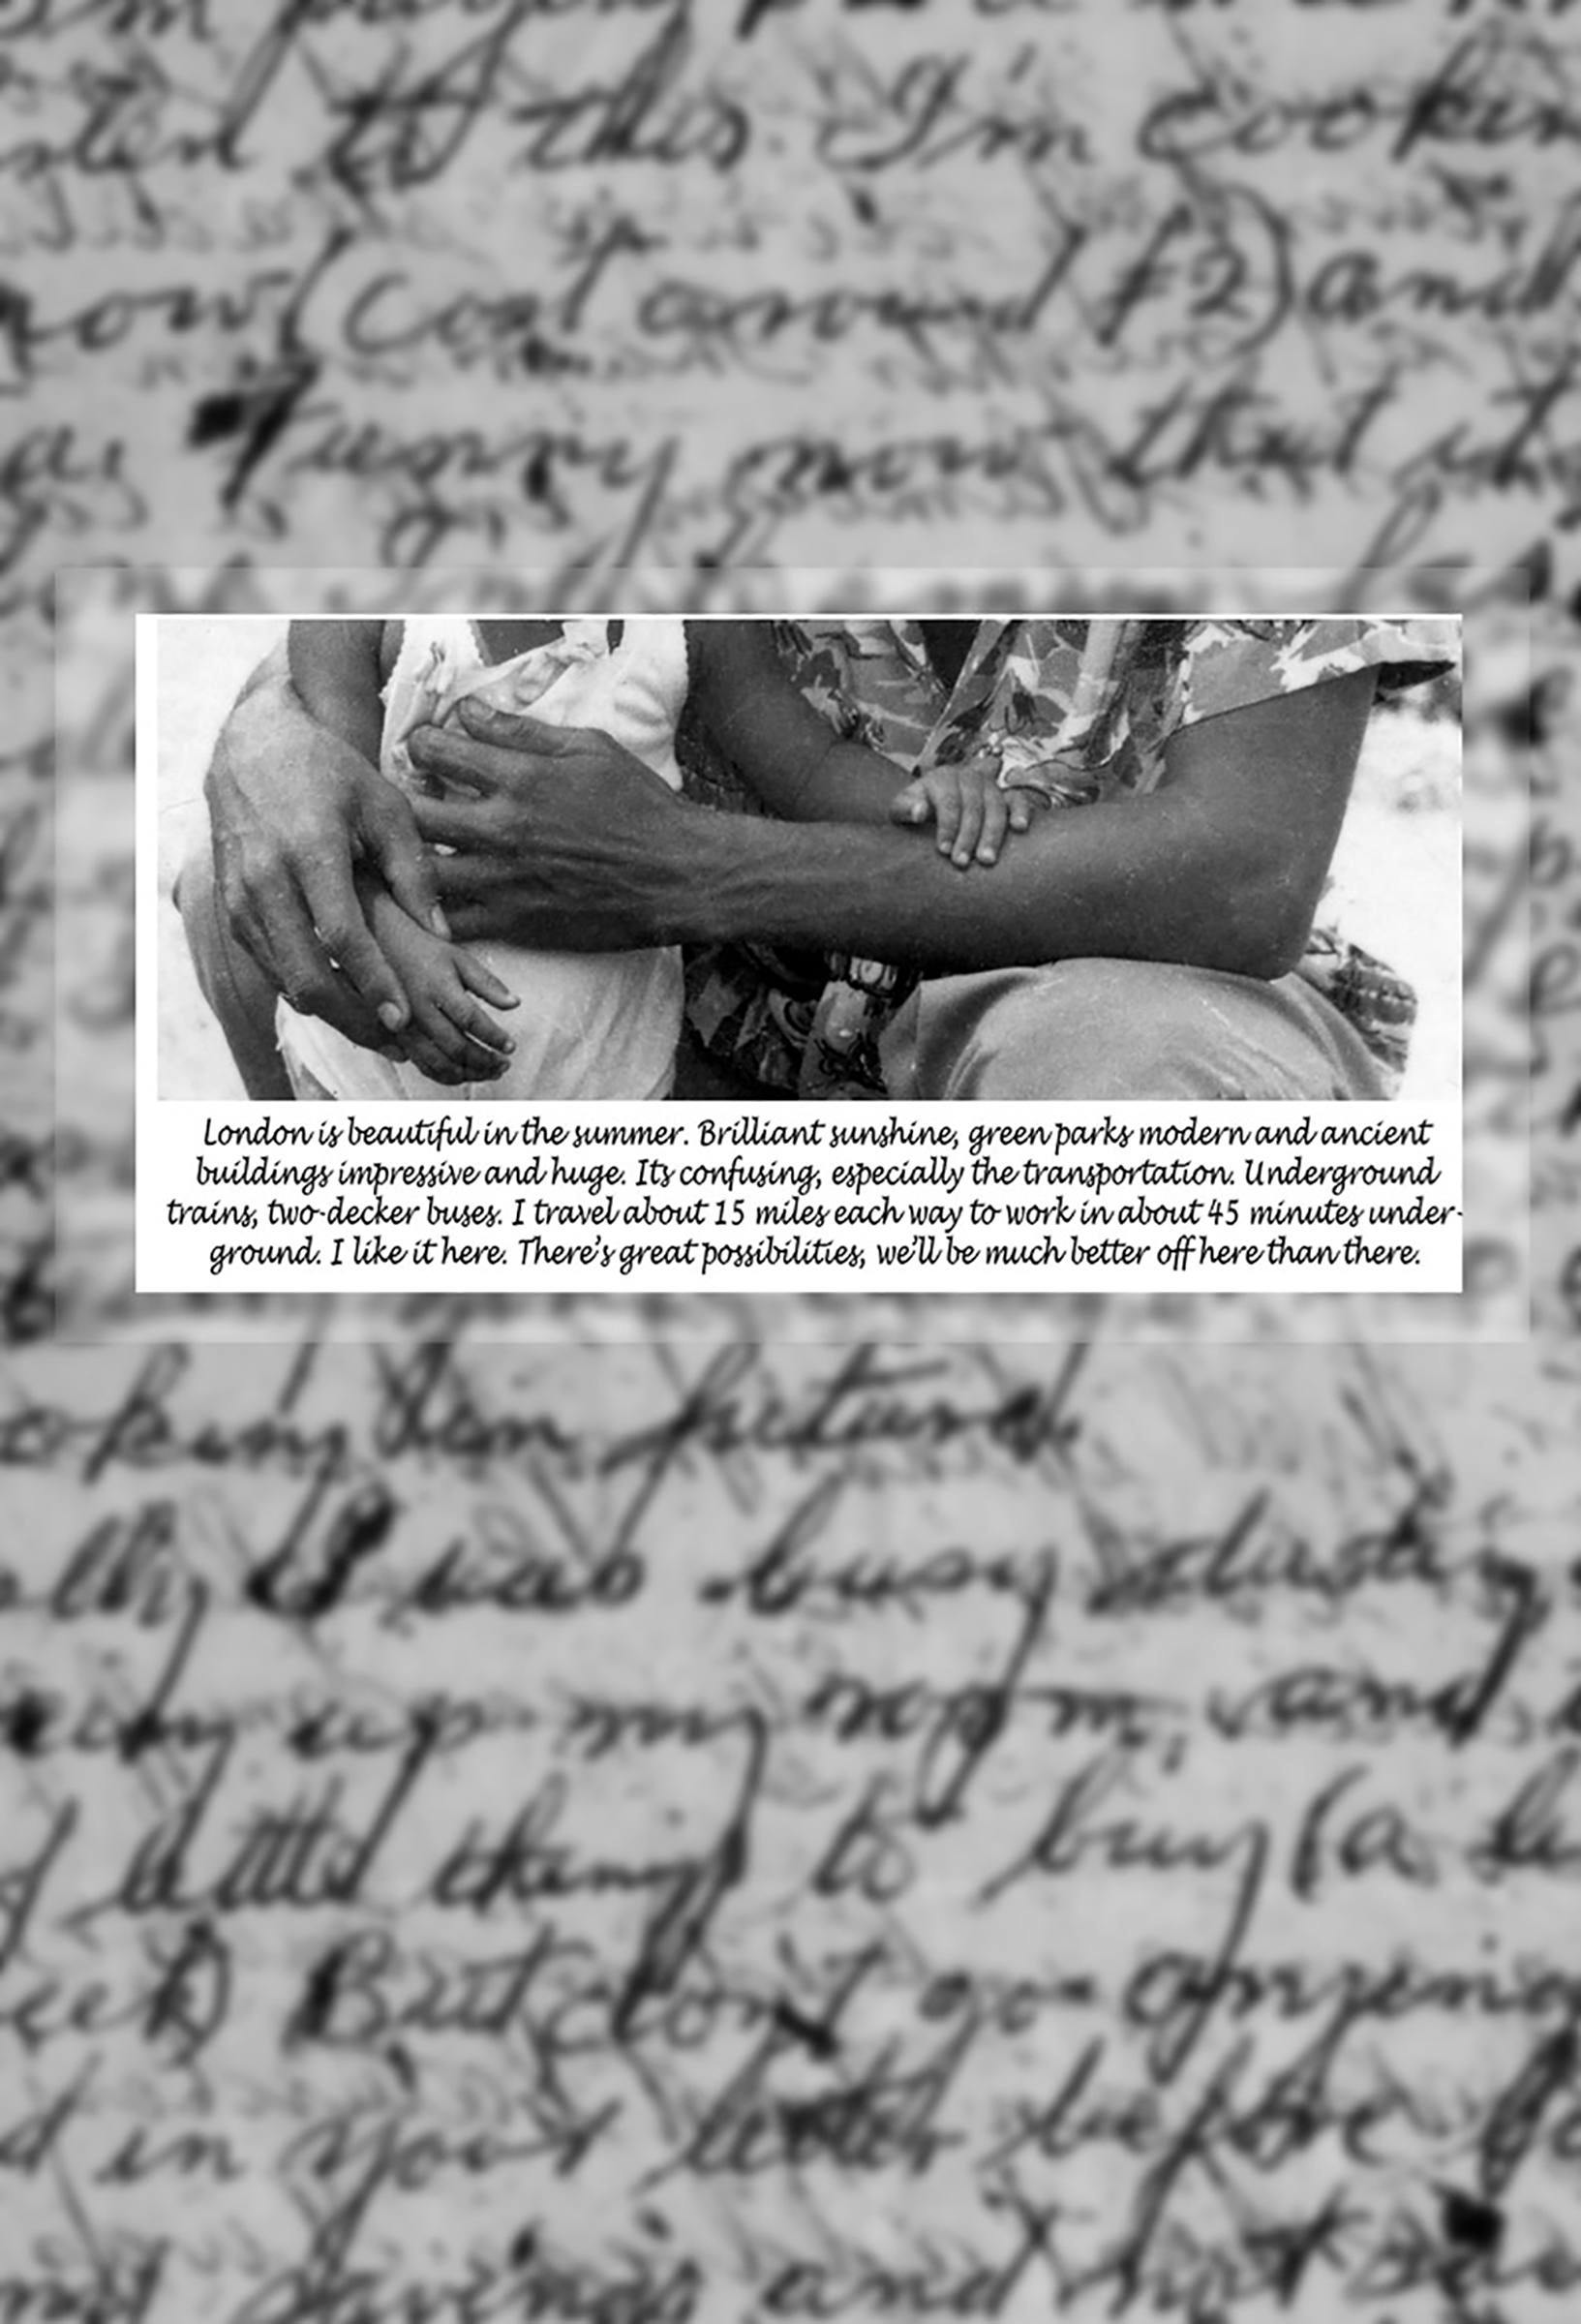 Black and white image of people's arms wrapped around each other with caption written in handwriting. Imposed on top of another image of handwriting.